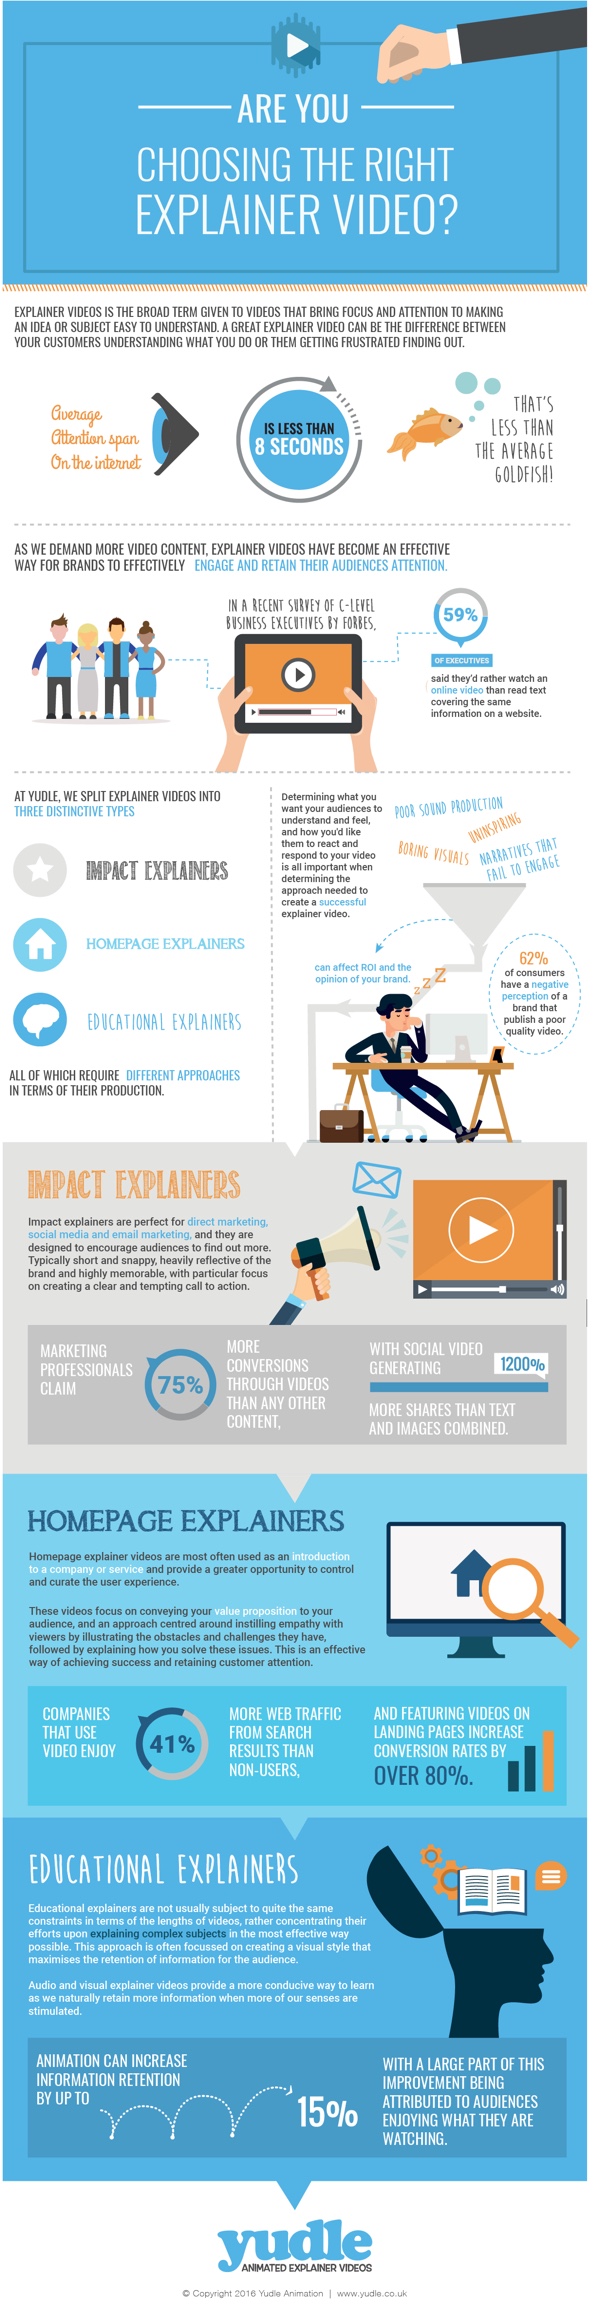 Choosing the Right Explainer Video infographic